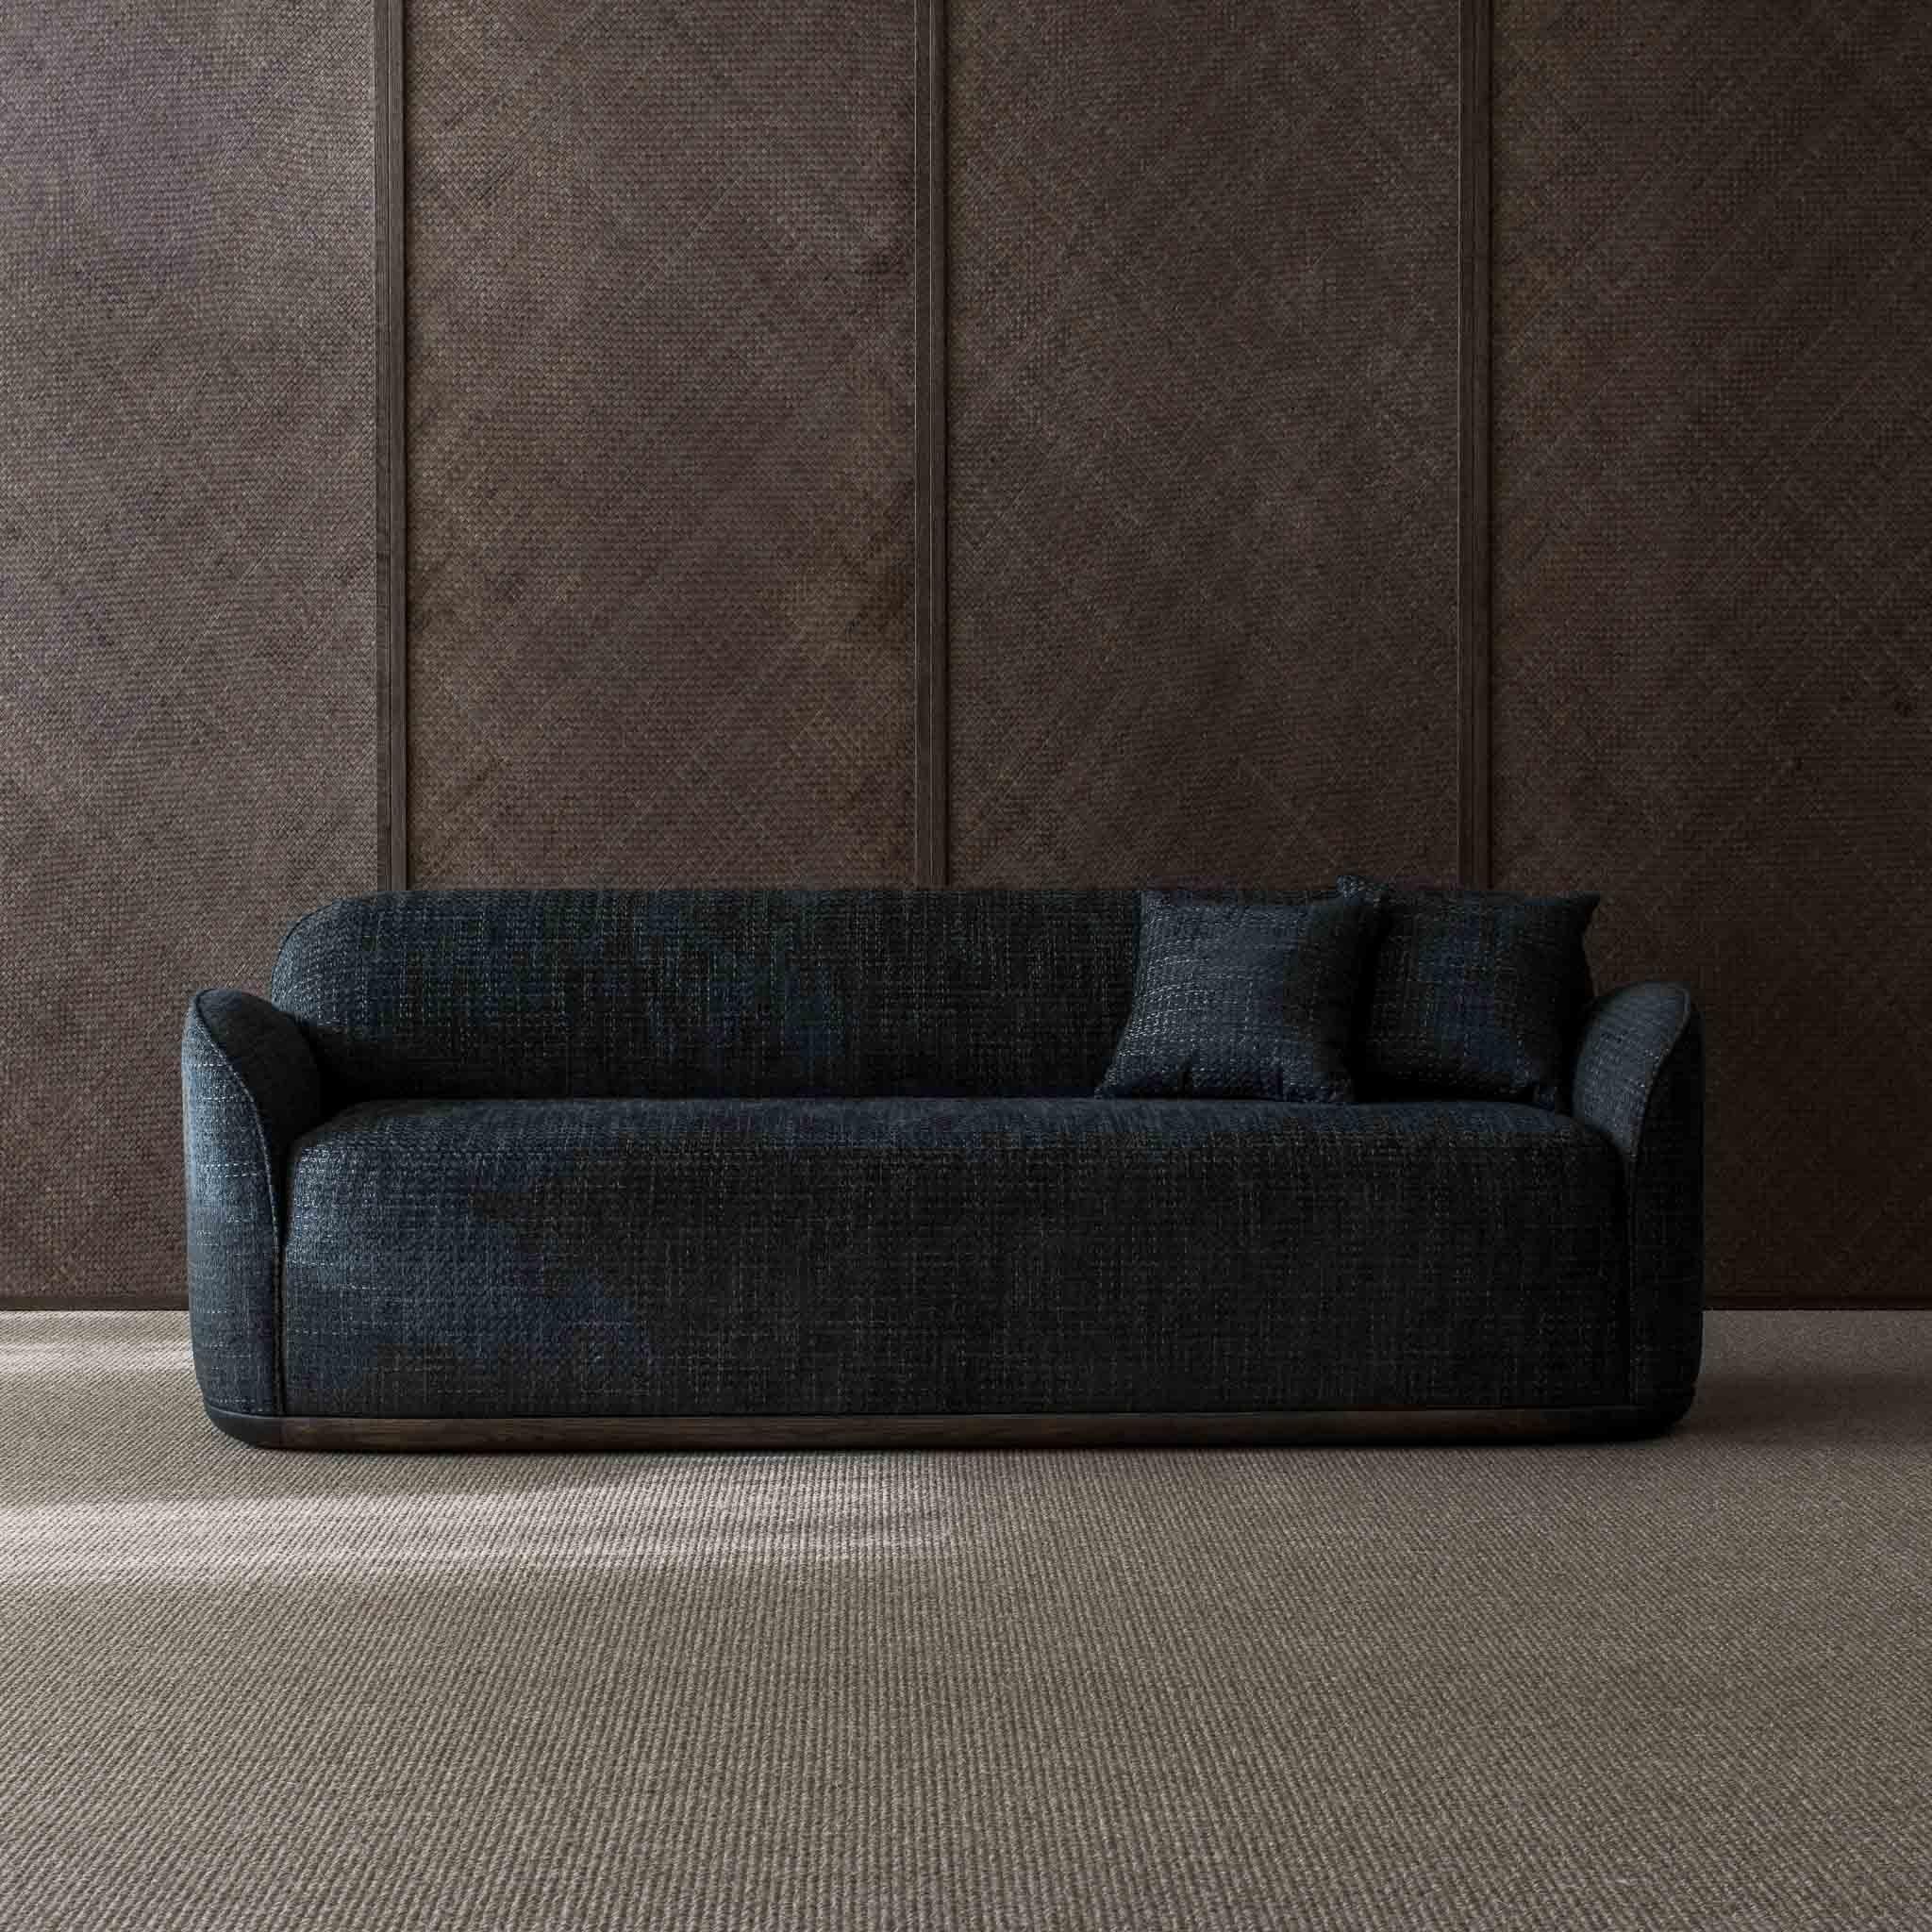 Finnish Unio Sofa Upholstered with Dedar Pergamena Fabric by Poiat For Sale